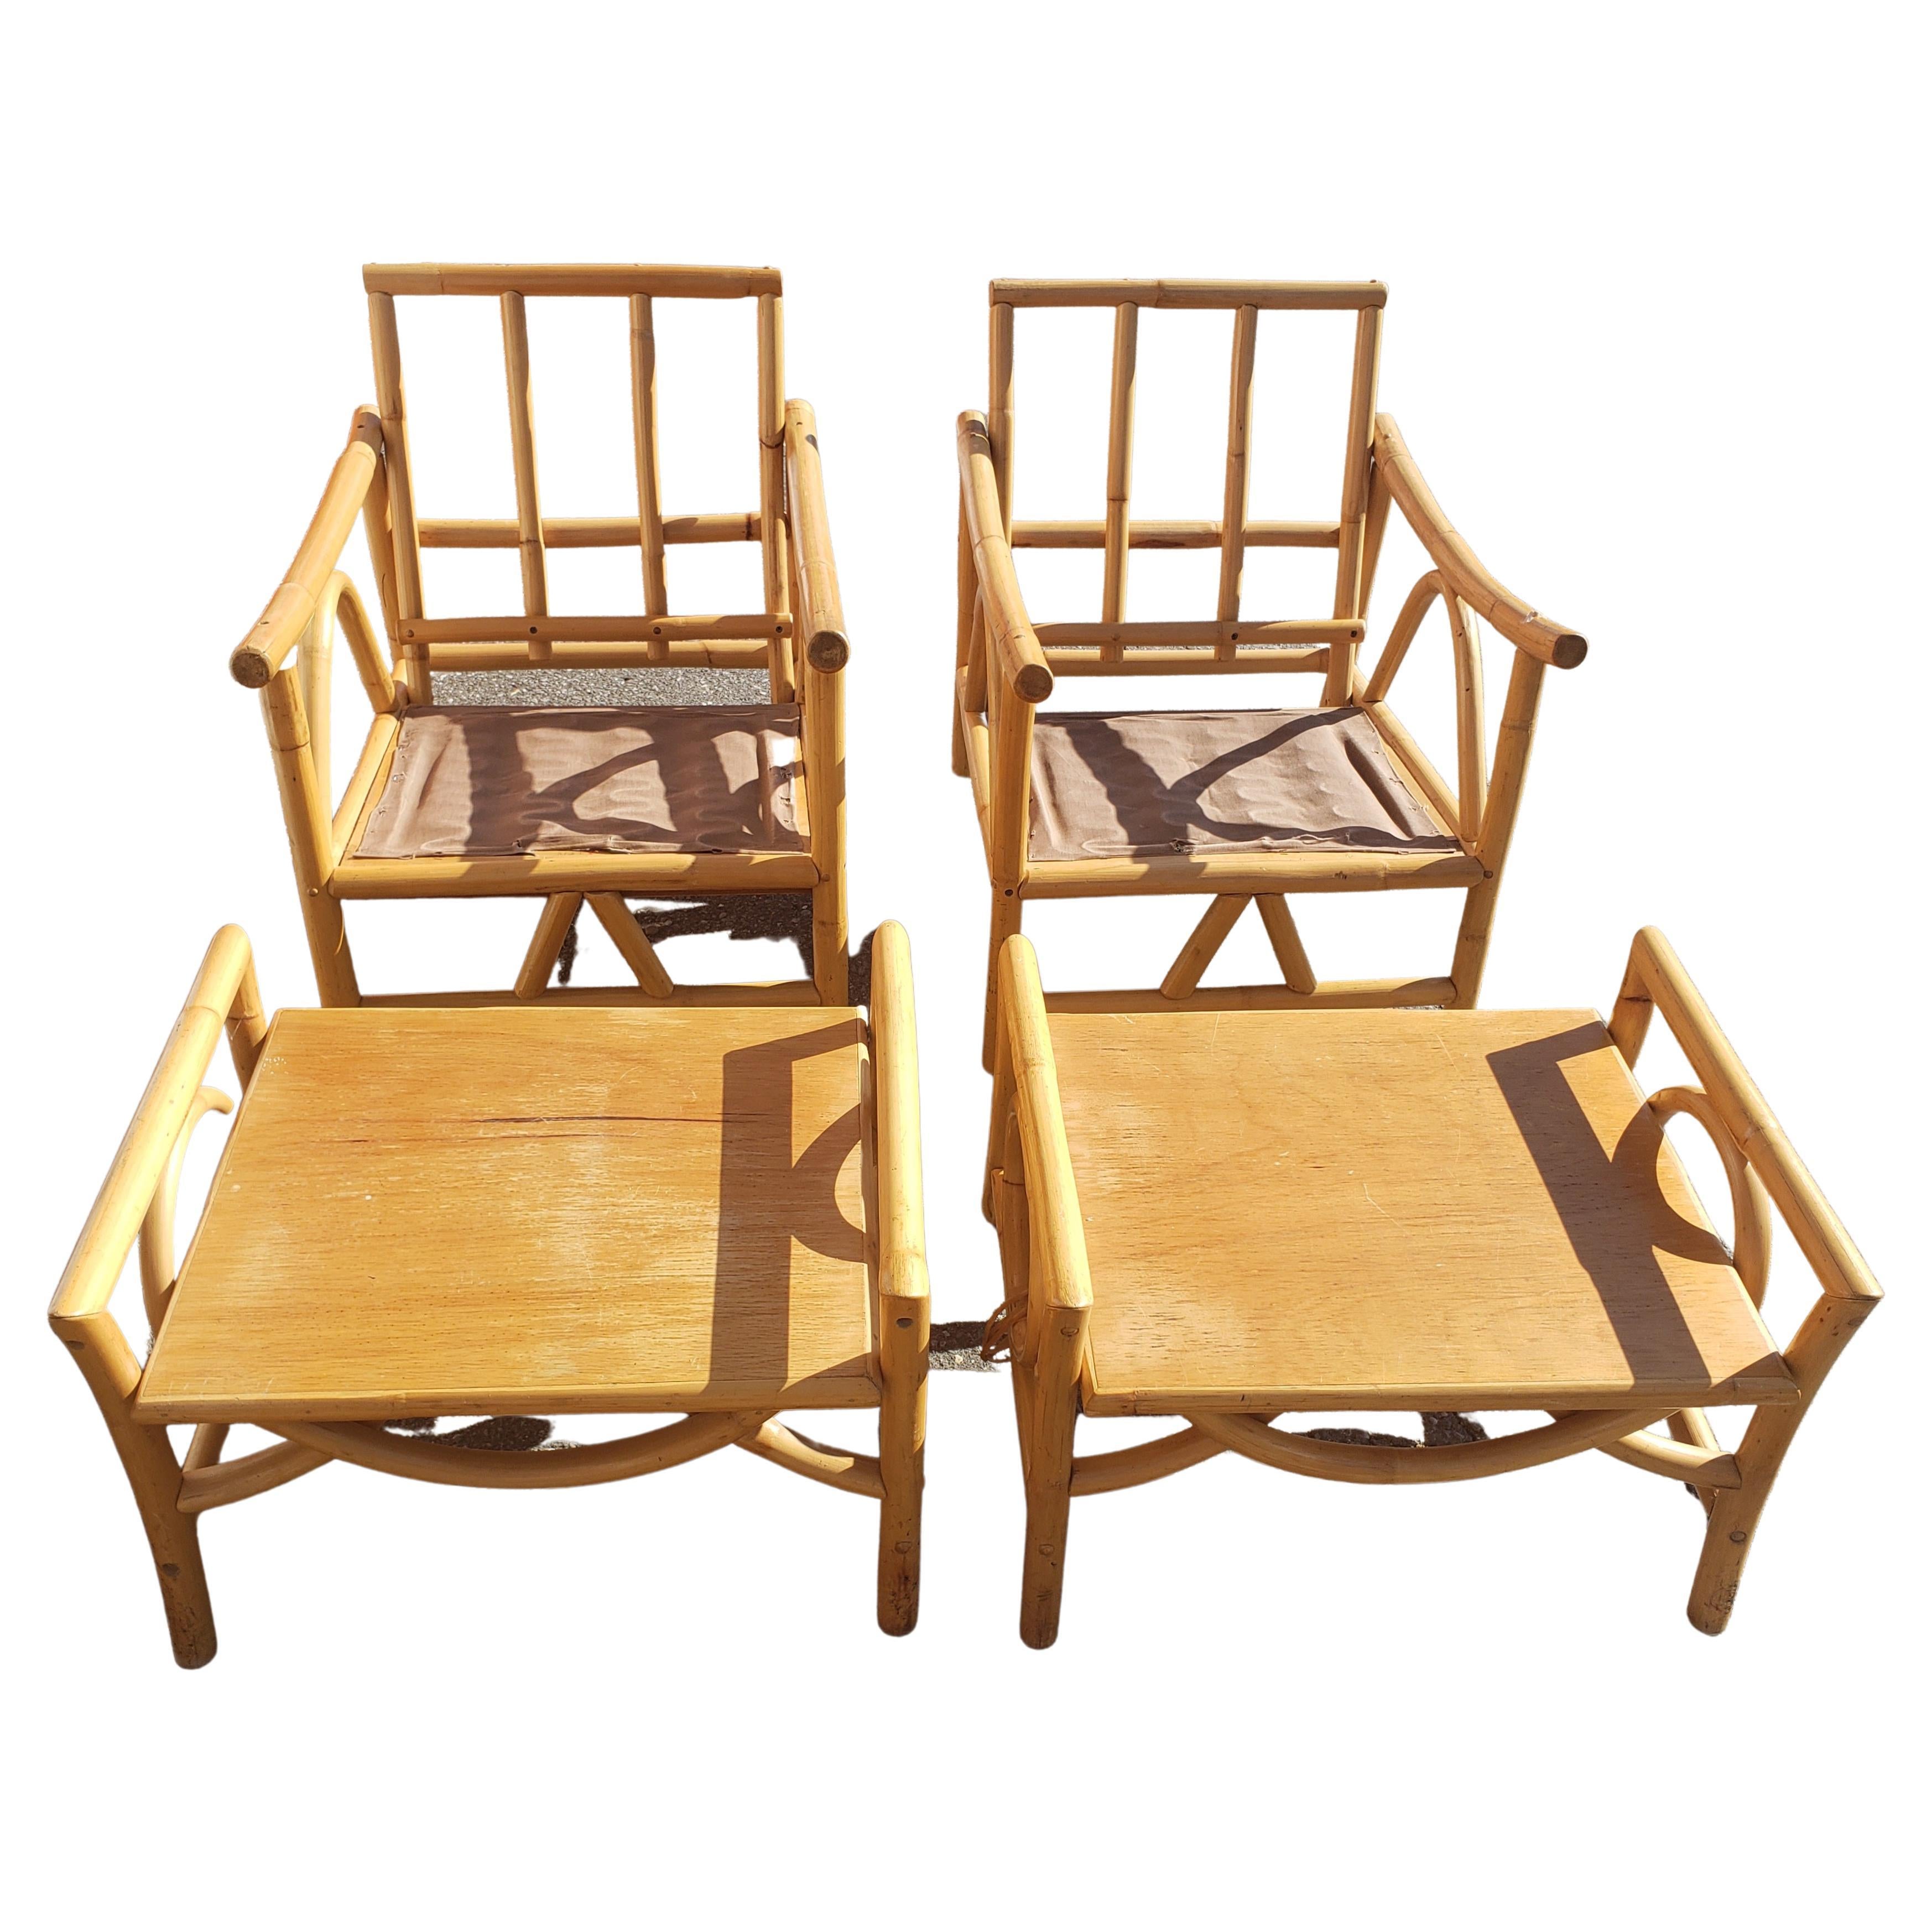 20th Century 1960s Bam Tan Rattan Bamboo Lounge Chair with Ottoman, a Pair